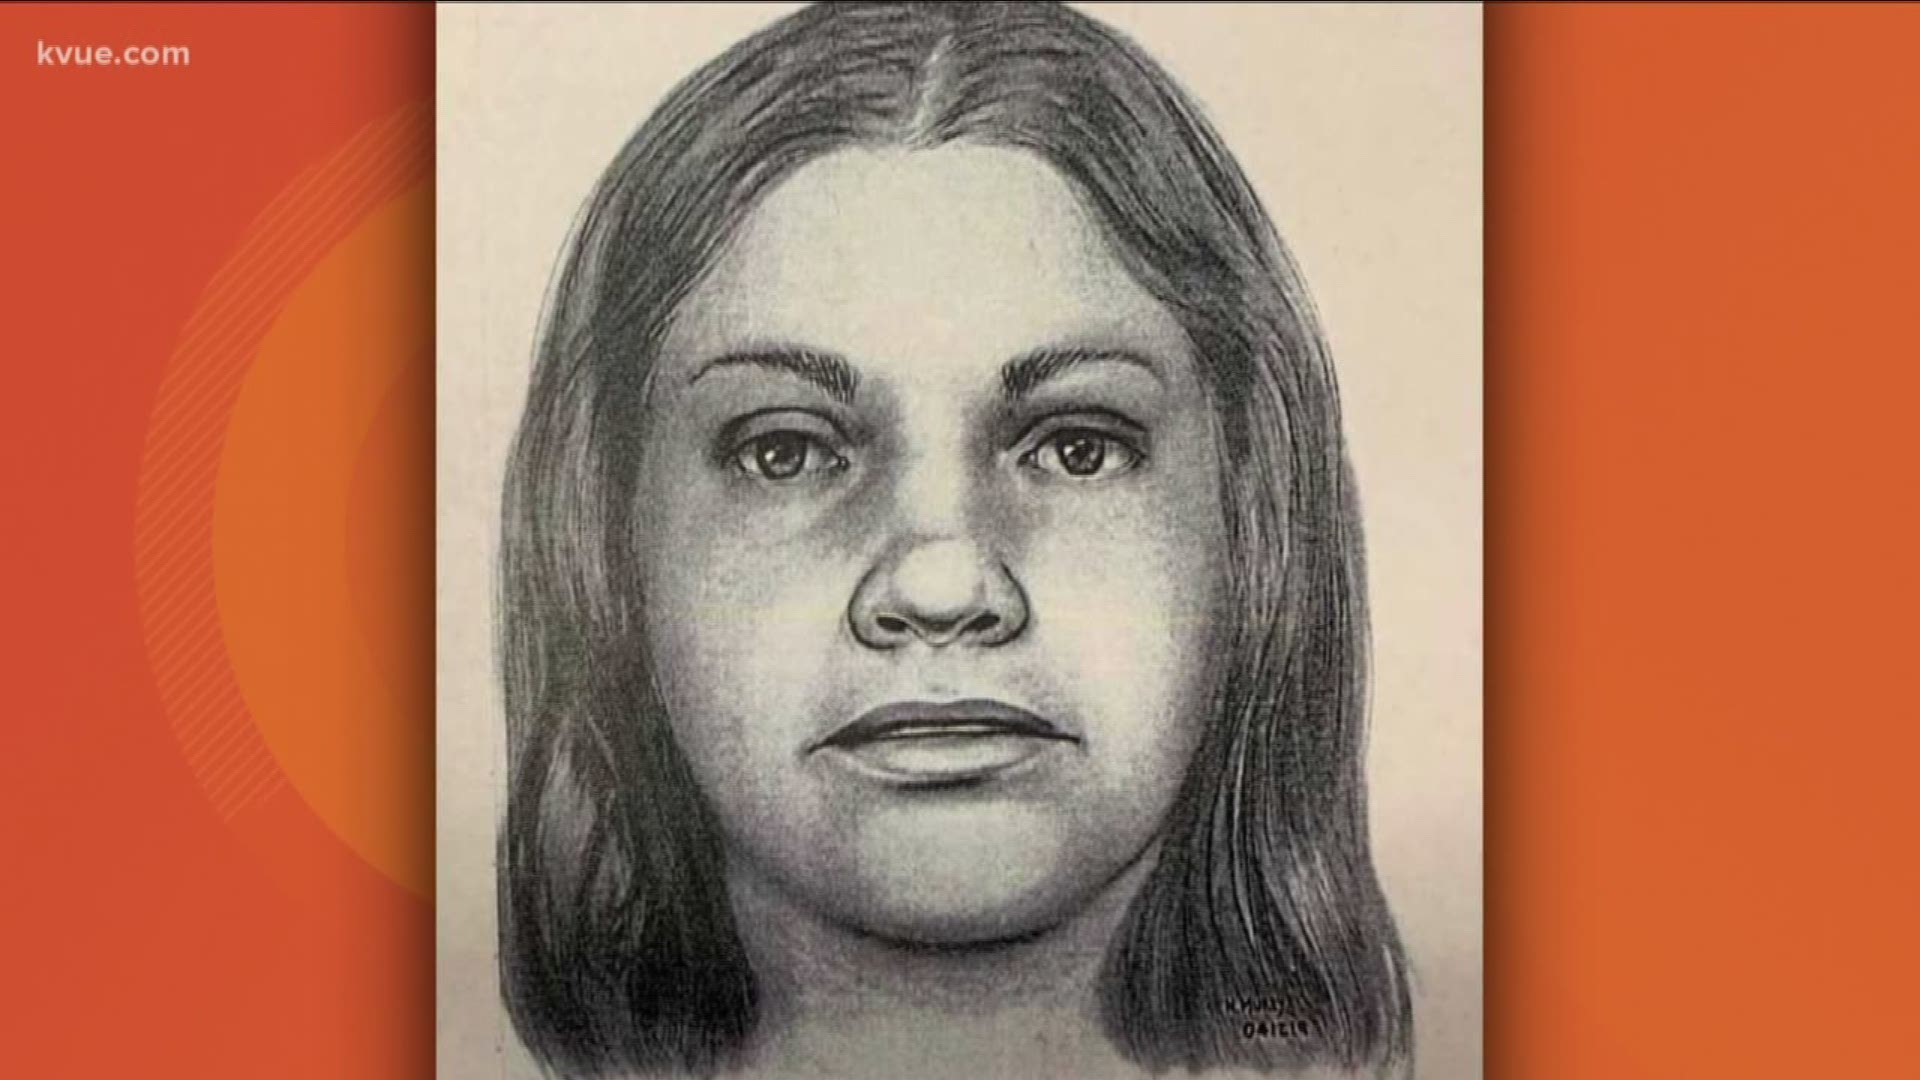 Officials are still working to identify a woman whose body was found in 1989 in the Jarrell area. They are hoping this updated sketch of her will help.